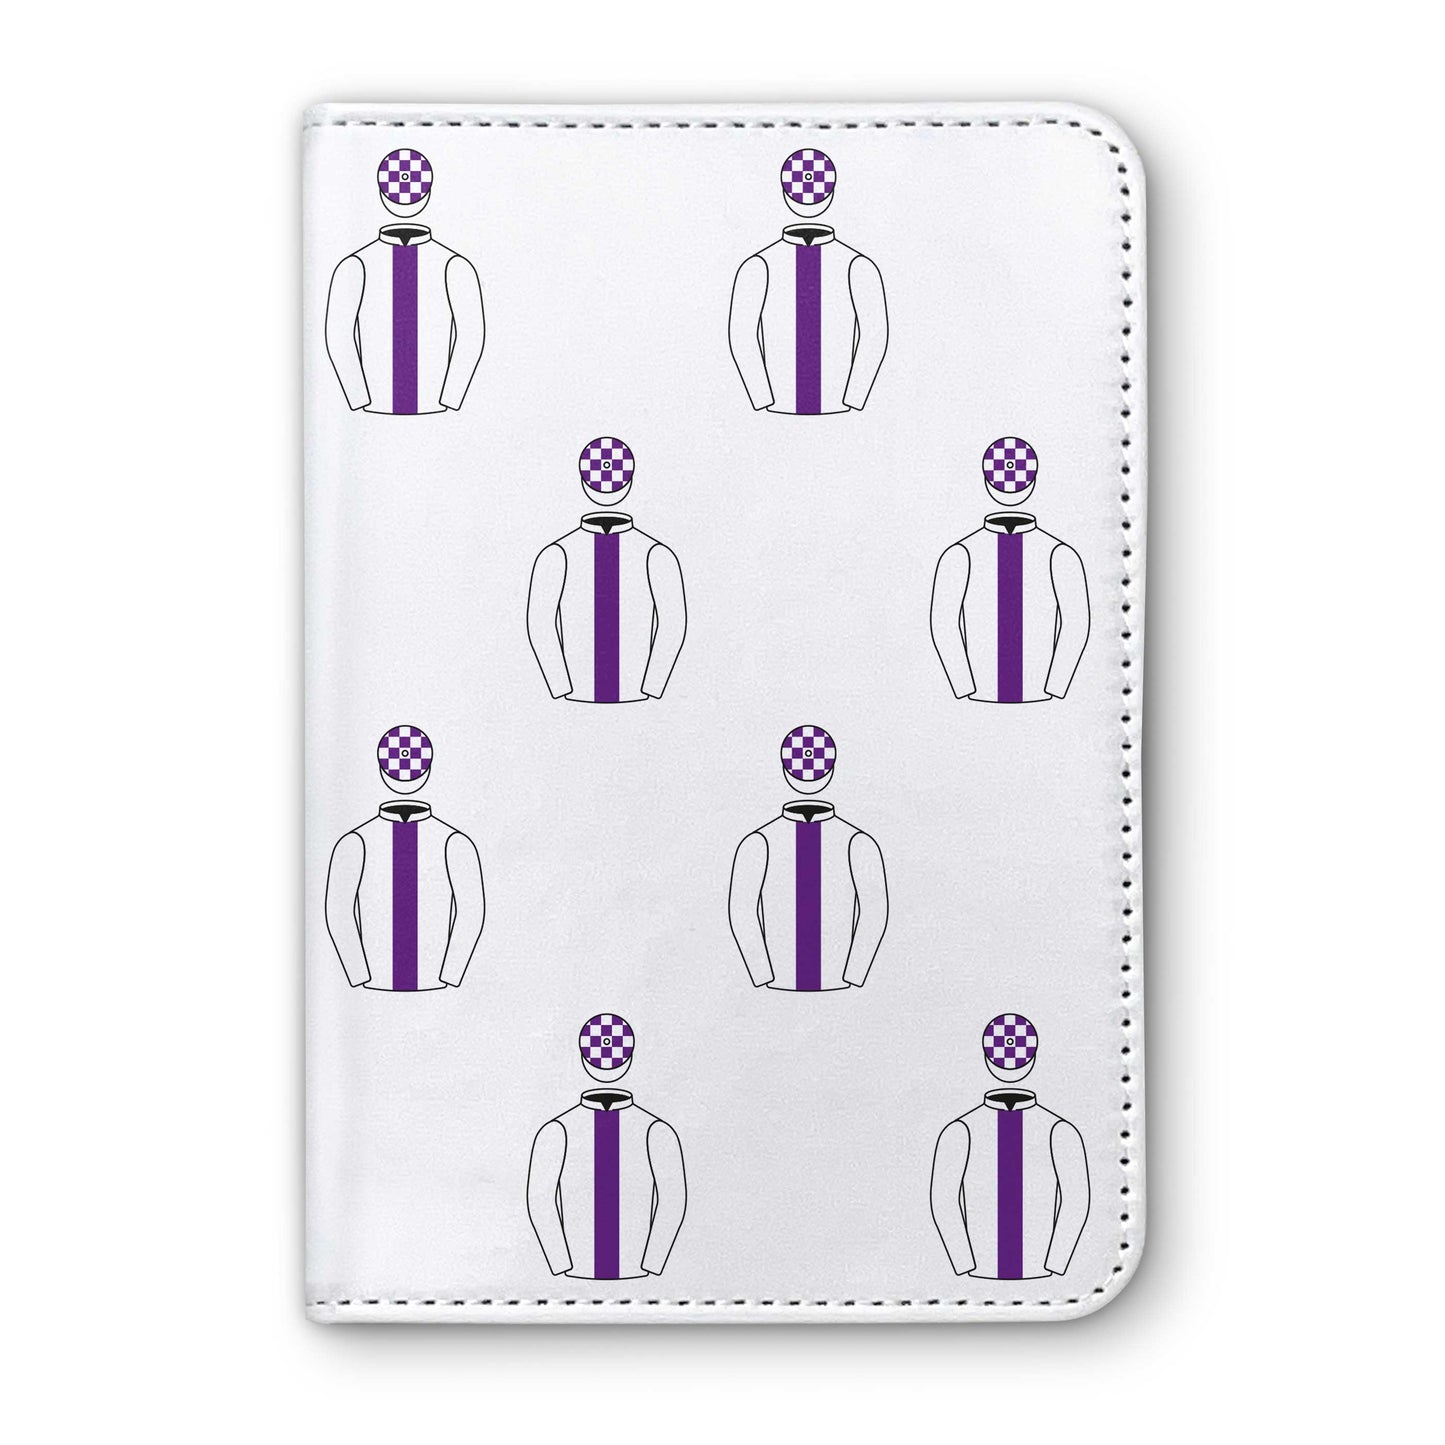 Mrs J S Bolger Horse Racing Passport Holder - Hacked Up Horse Racing Gifts